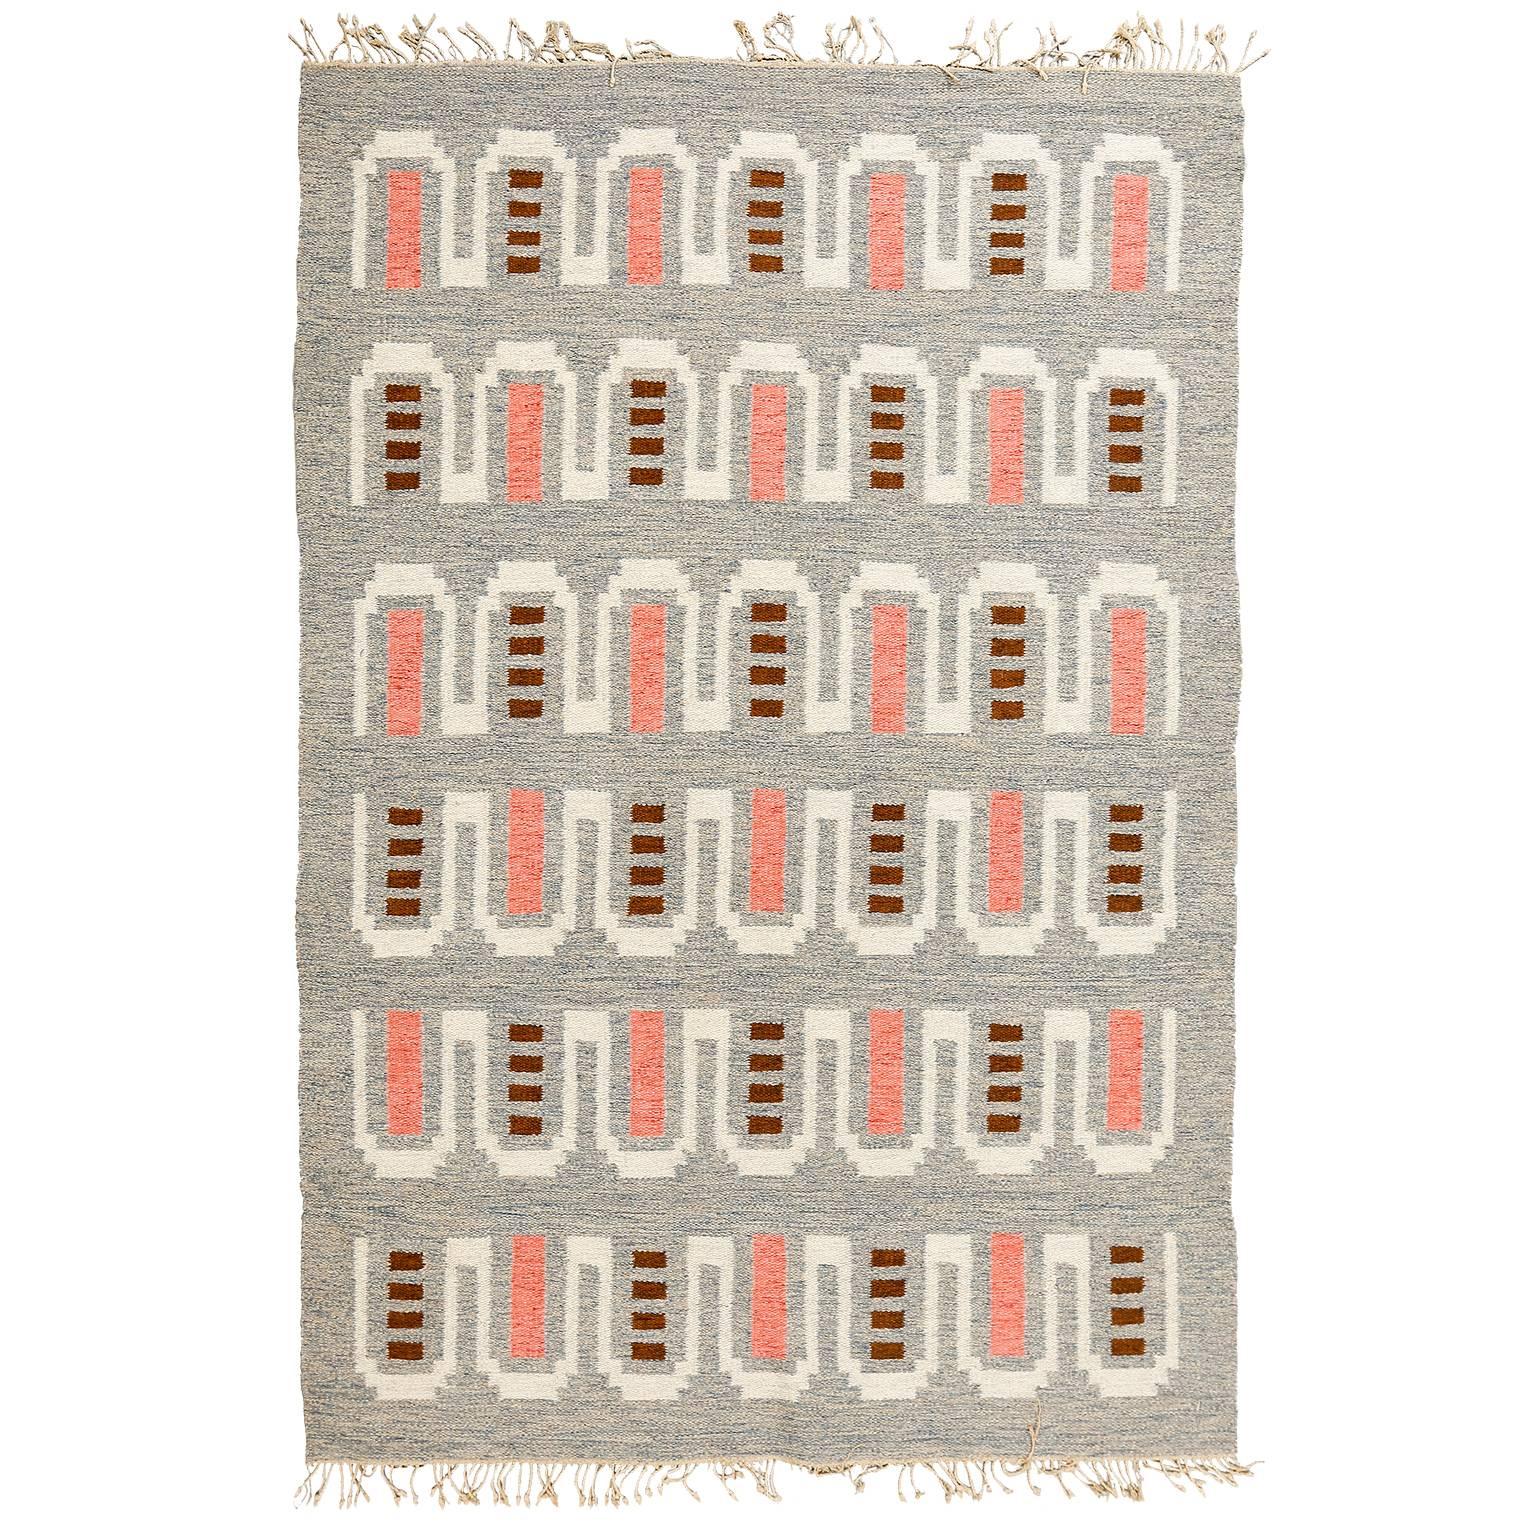 Scandinavian Modern Flat-Weave Rug  in Coral and Heather Gray